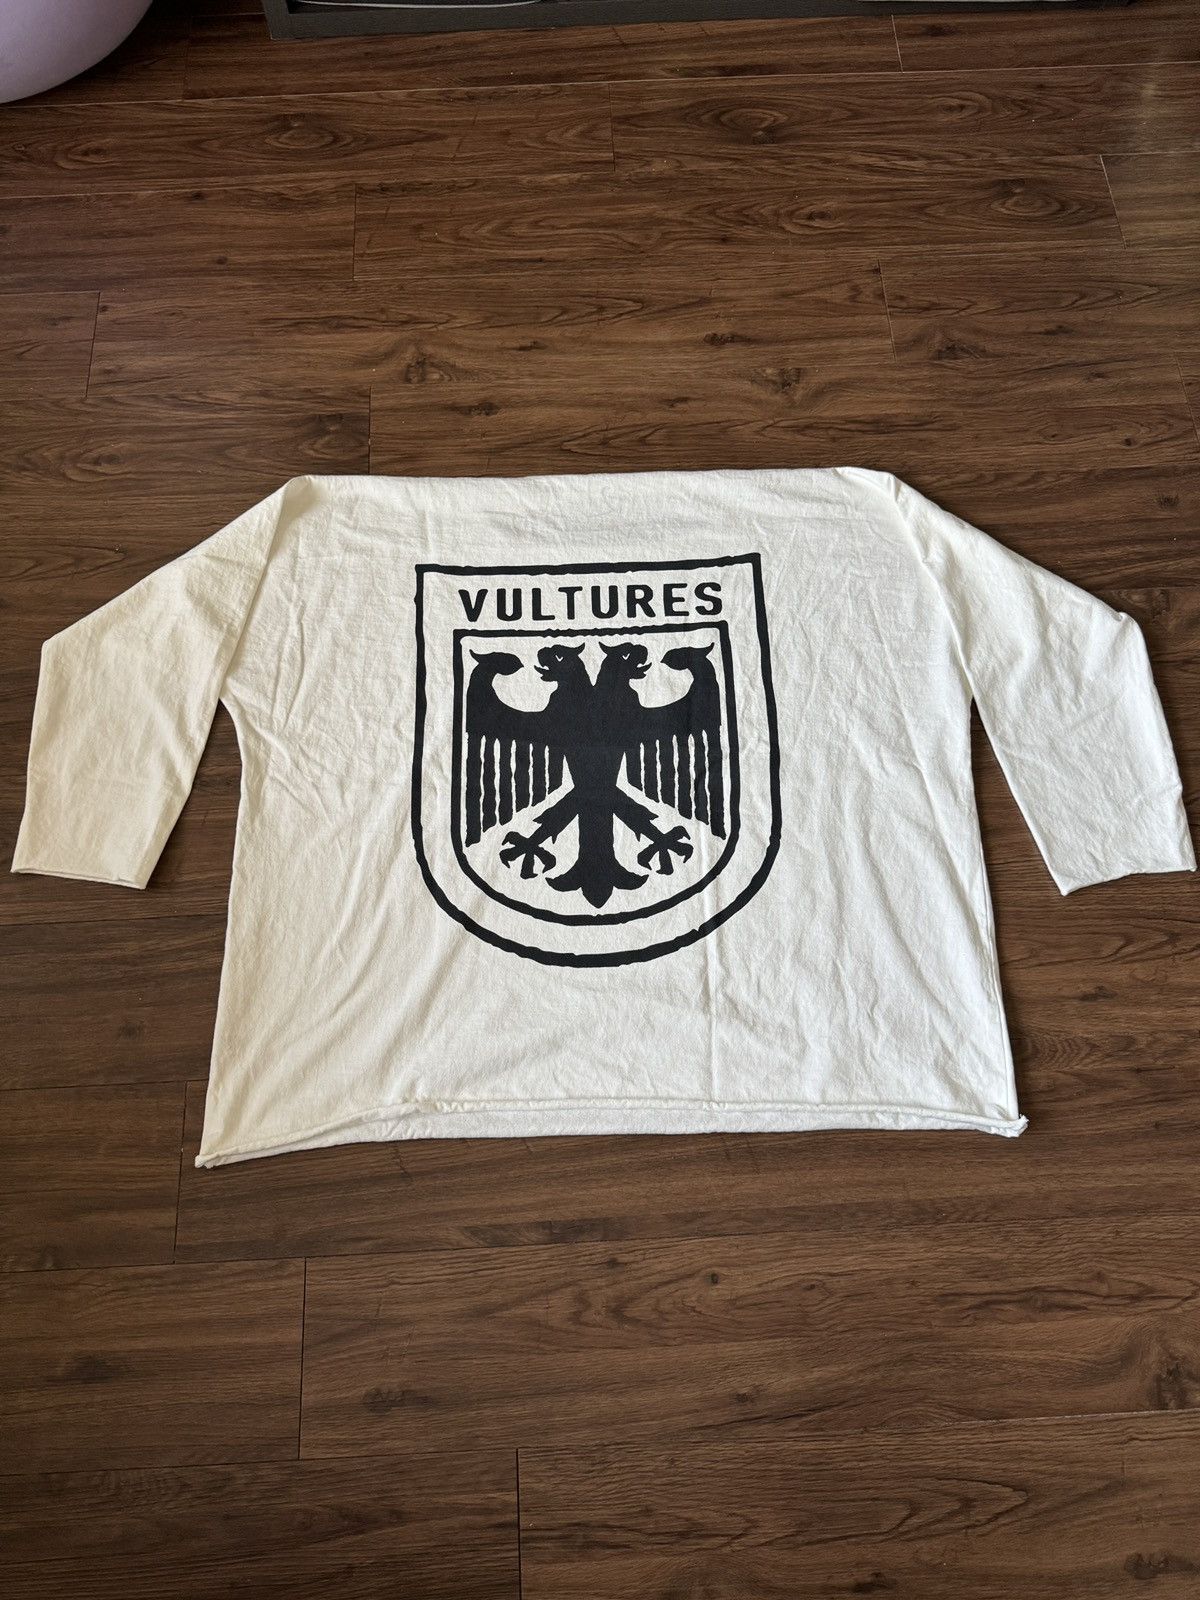 Kanye West YEEZY VULTURES LONG SLEEVE BOX TEE WHITE SIZE 2 BRAND 